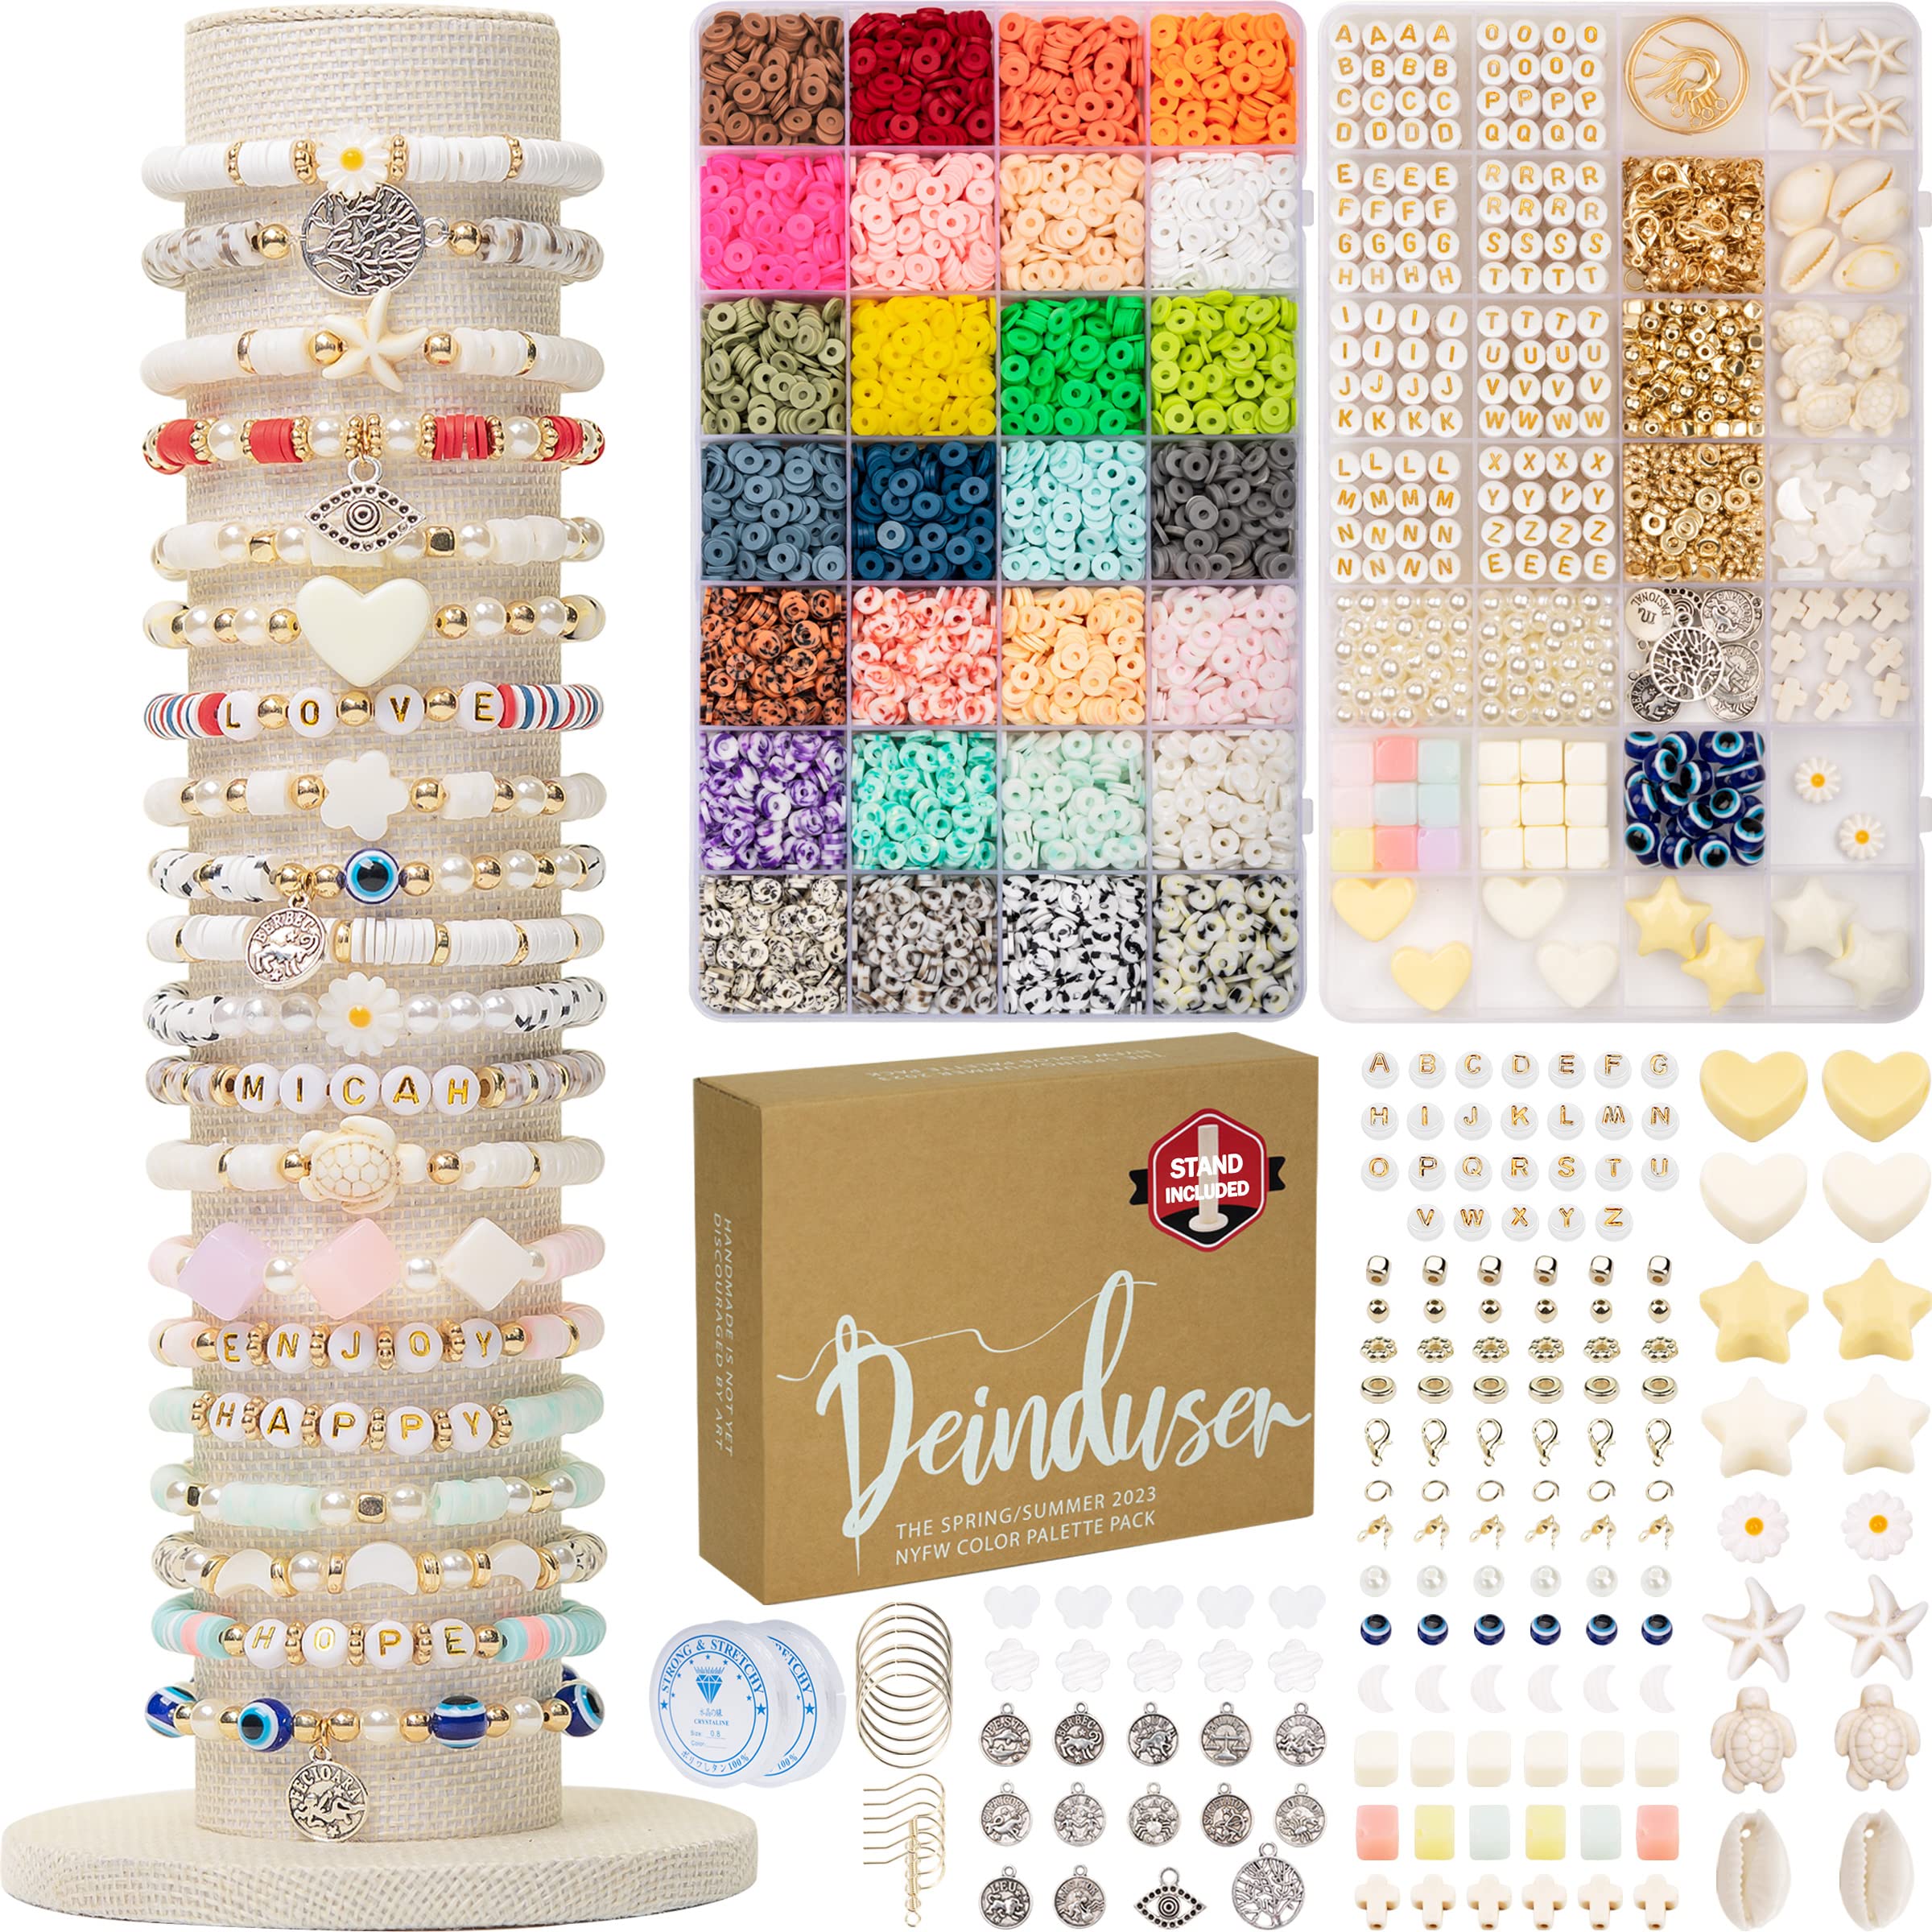 Deinduser Bracelet Making Kit - Jewelry kit with Stand 28 Colors